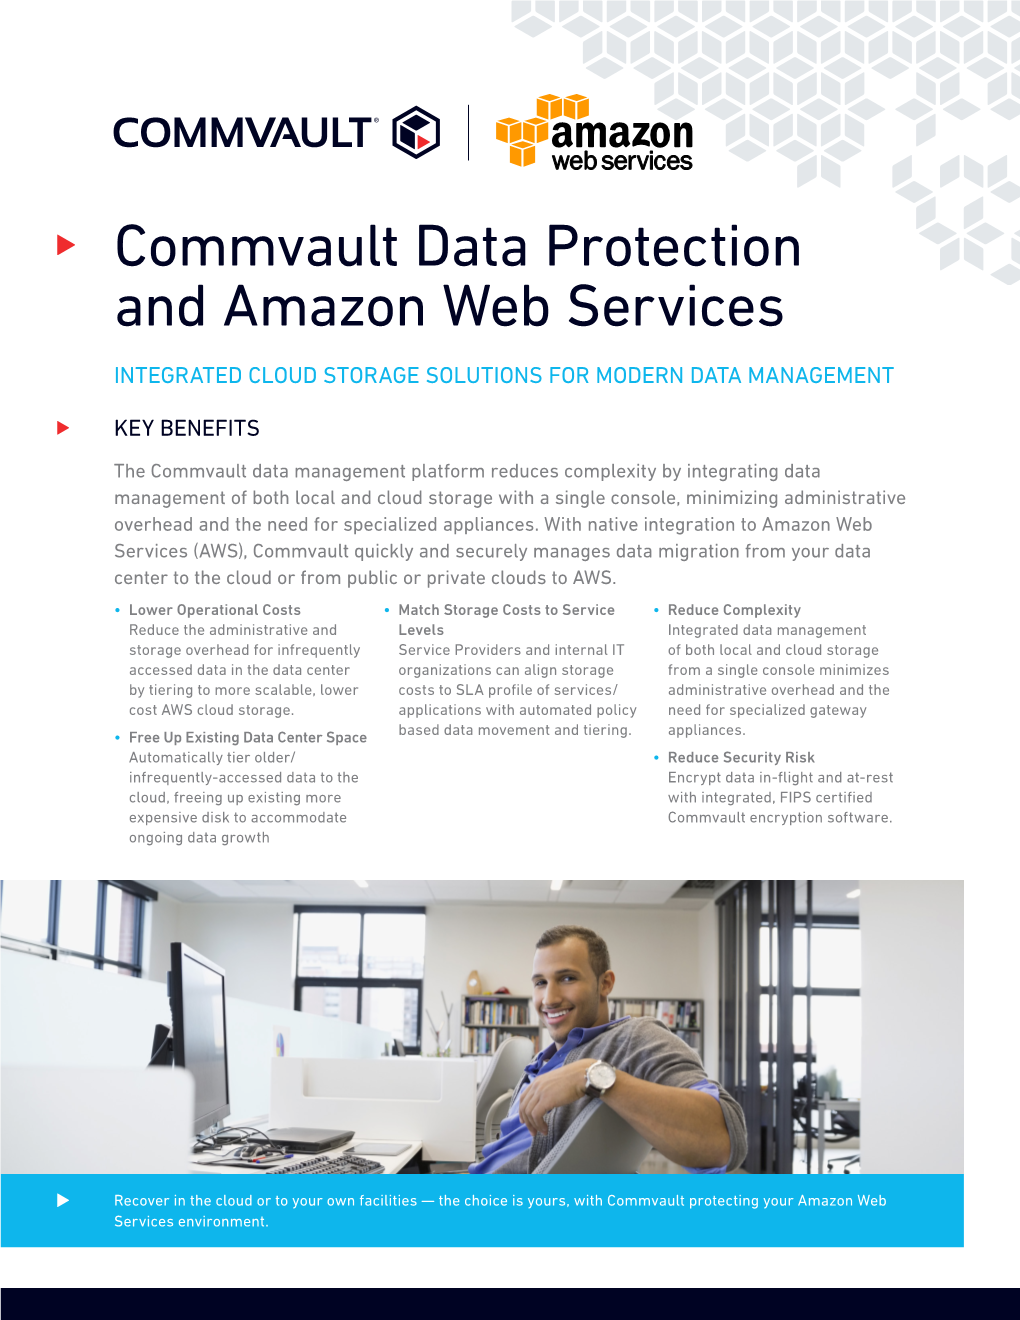 Commvault Data Protection and Amazon Web Services